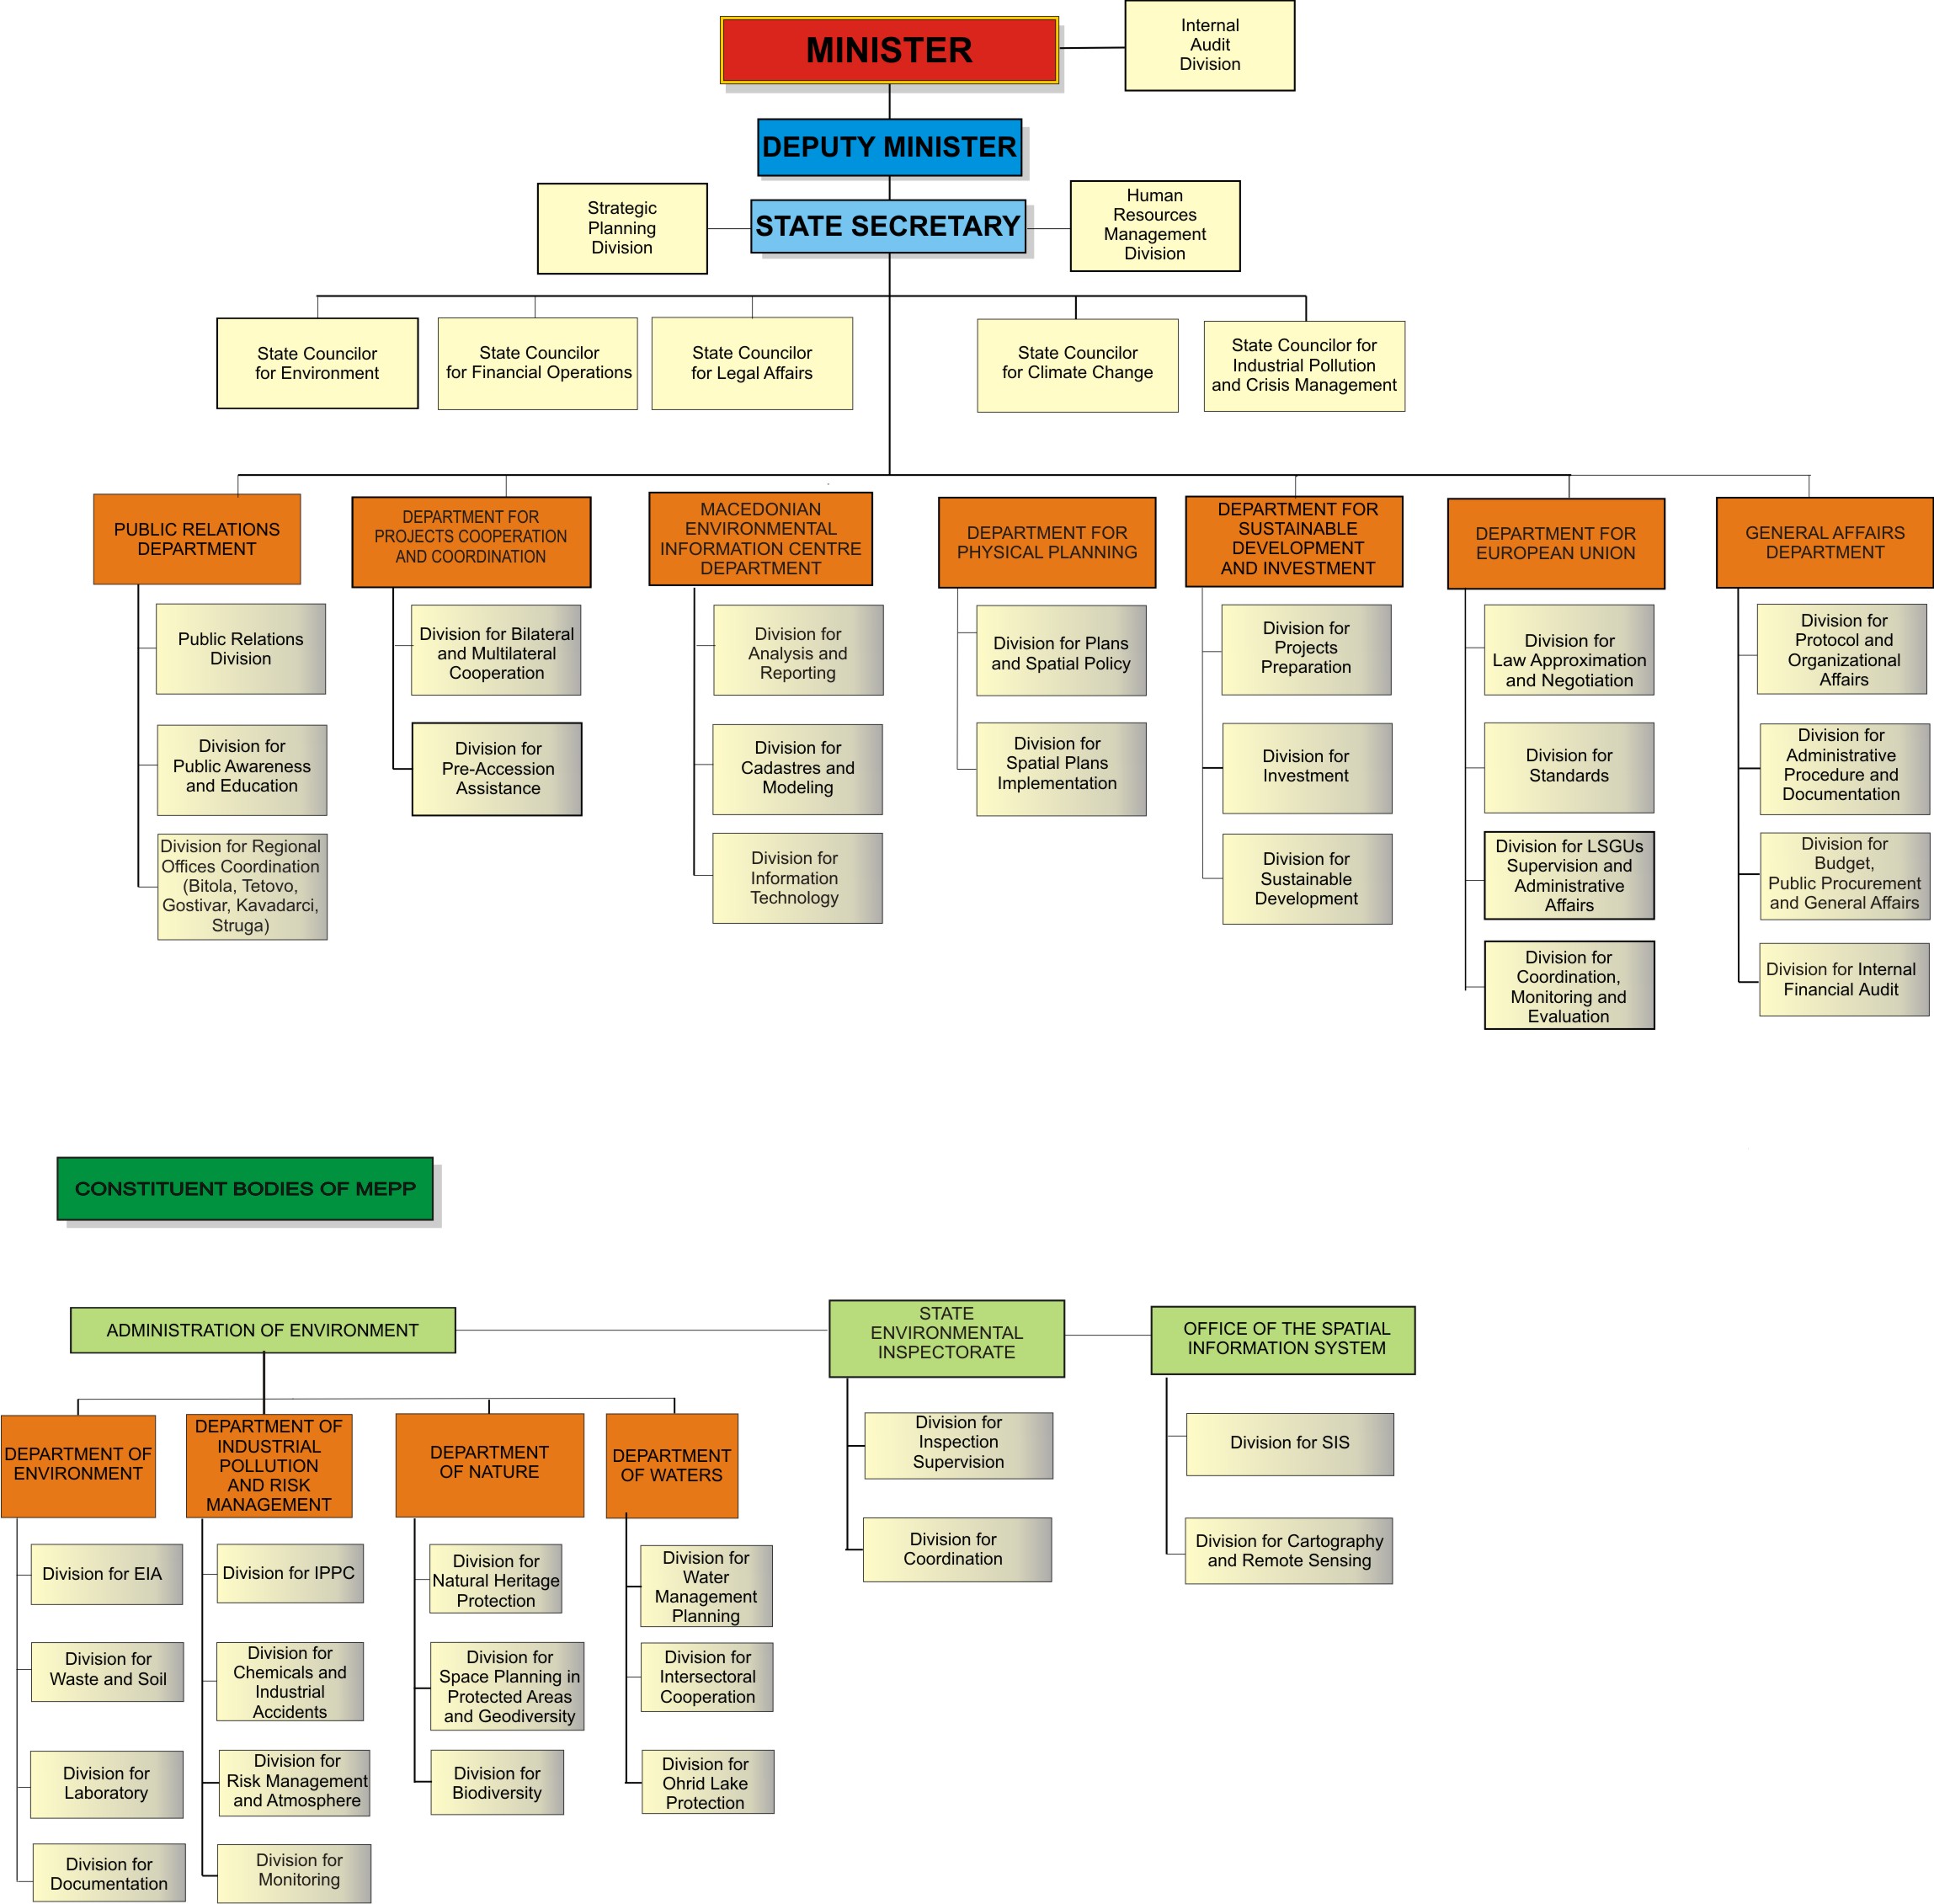 Figure 1: Ministry of Environment and Physical Planning organisational chart